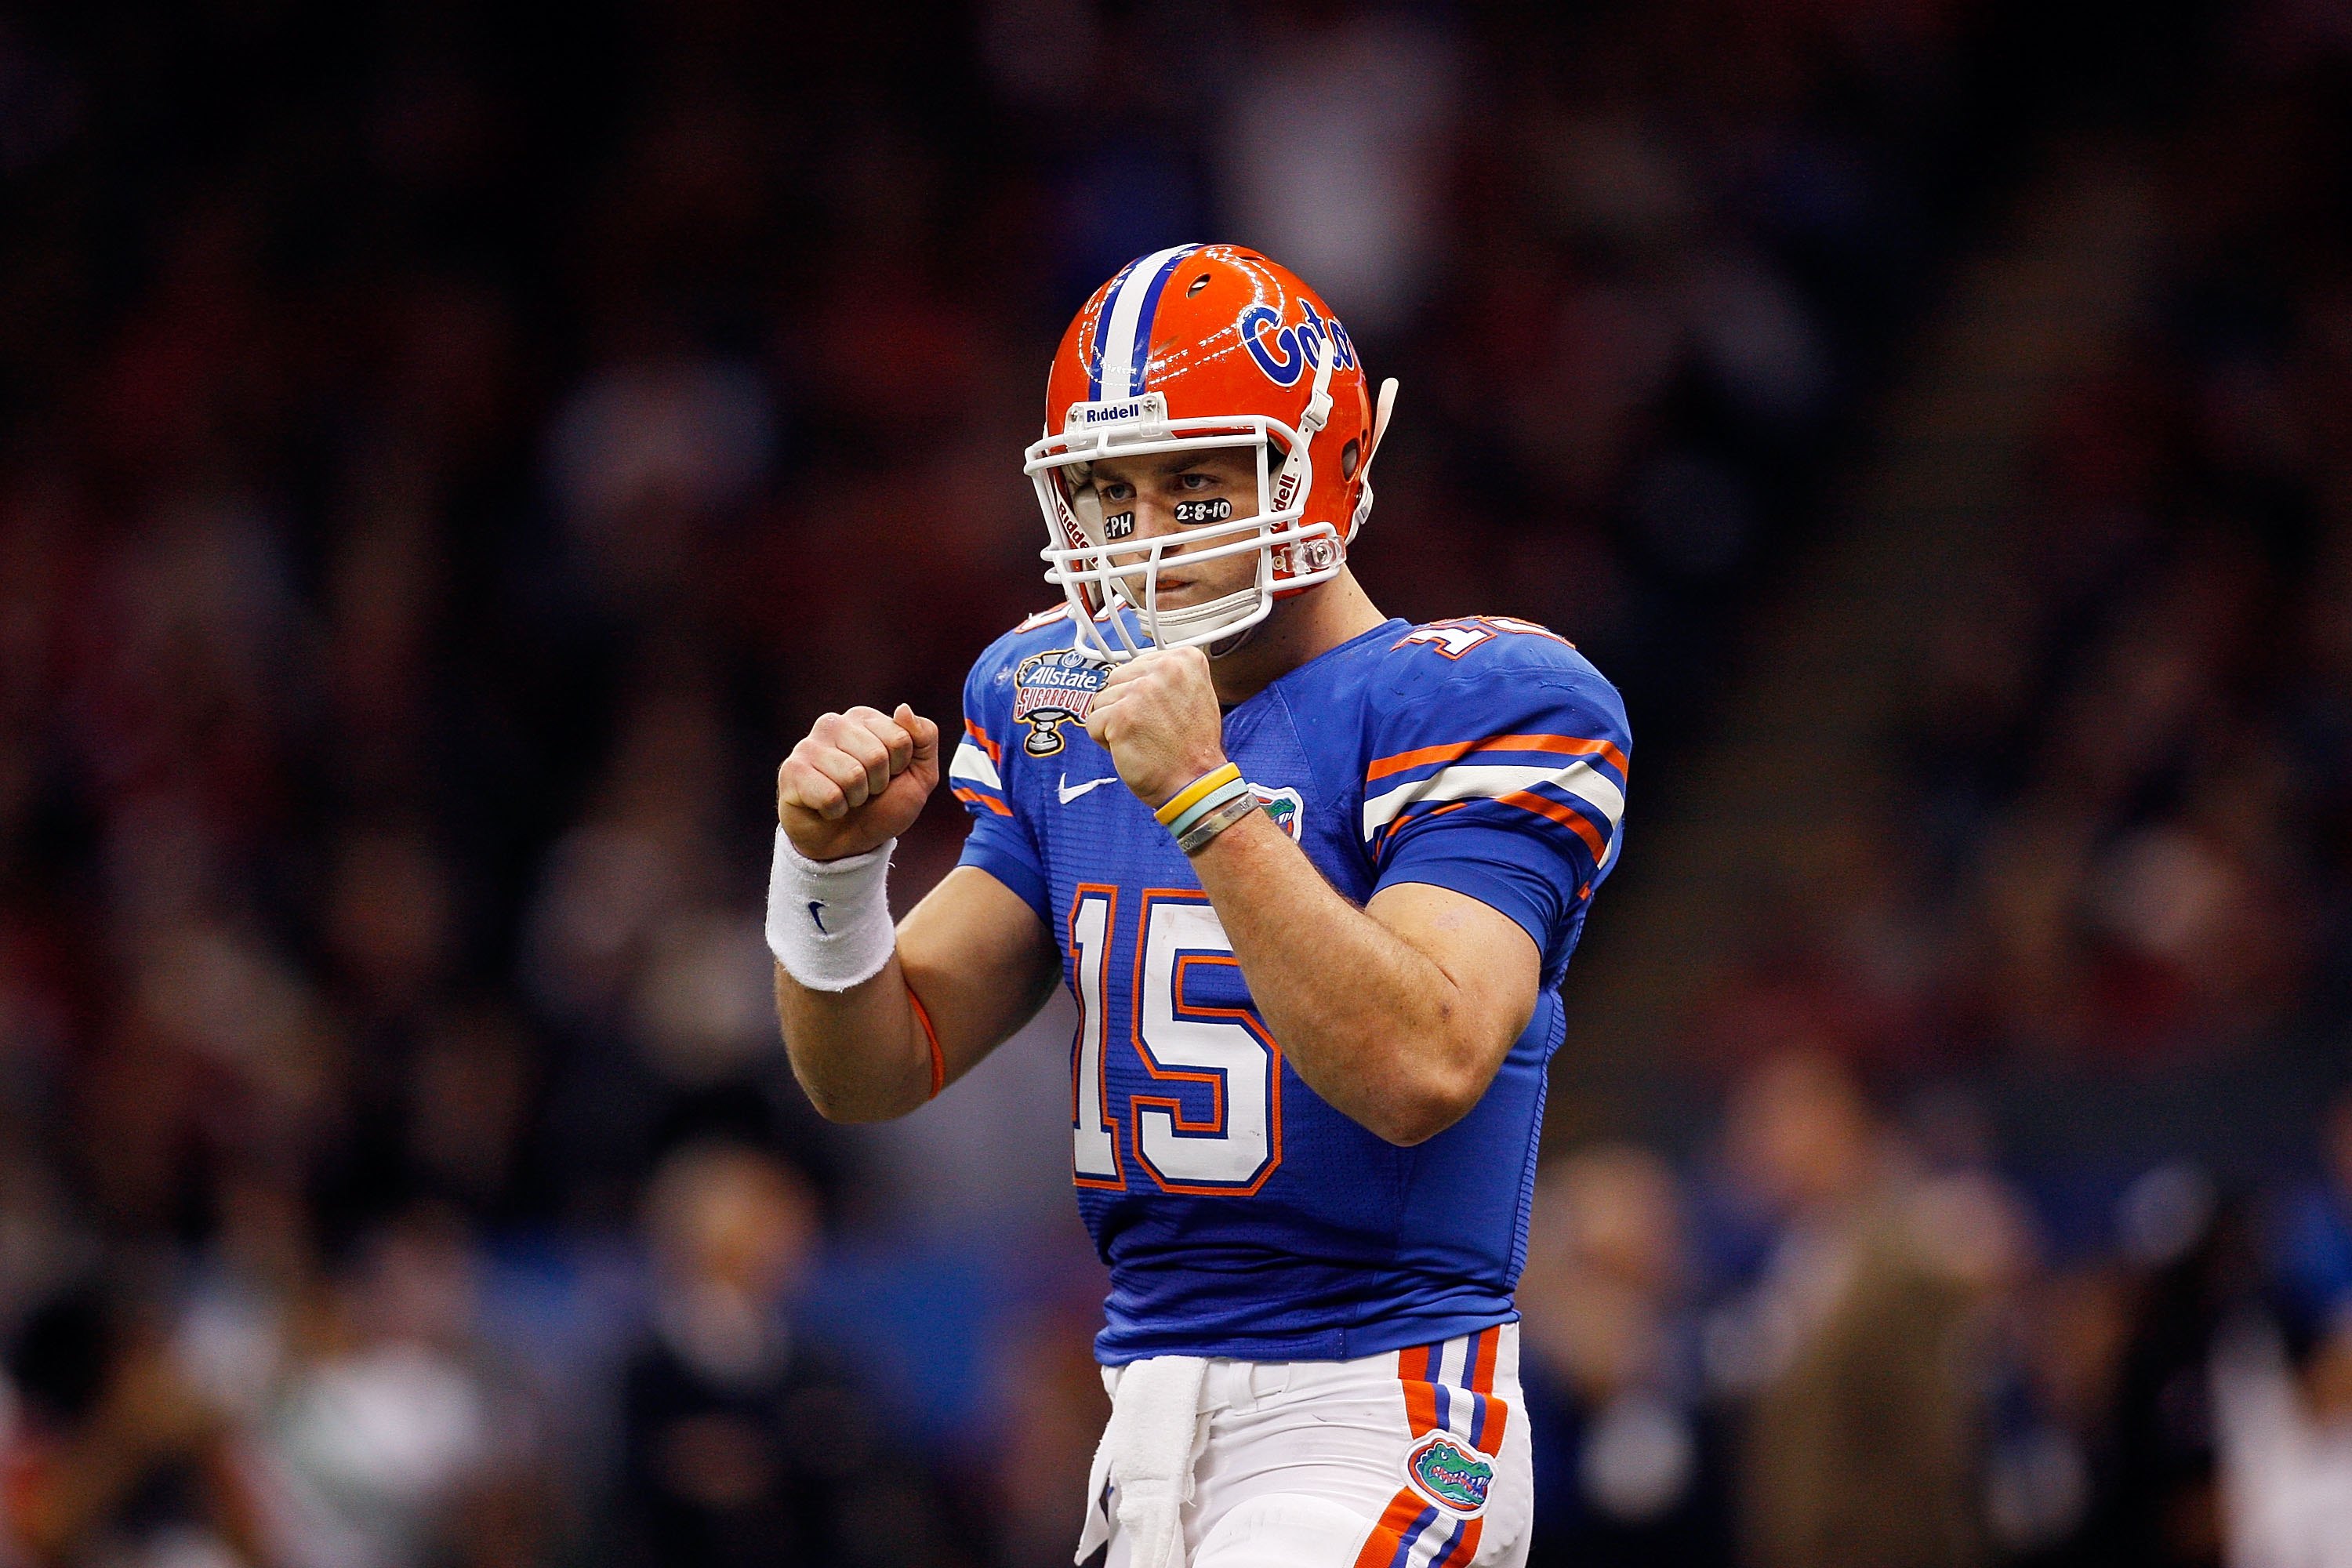 Scoreboard spoofs Tim Tebow with NFL stats